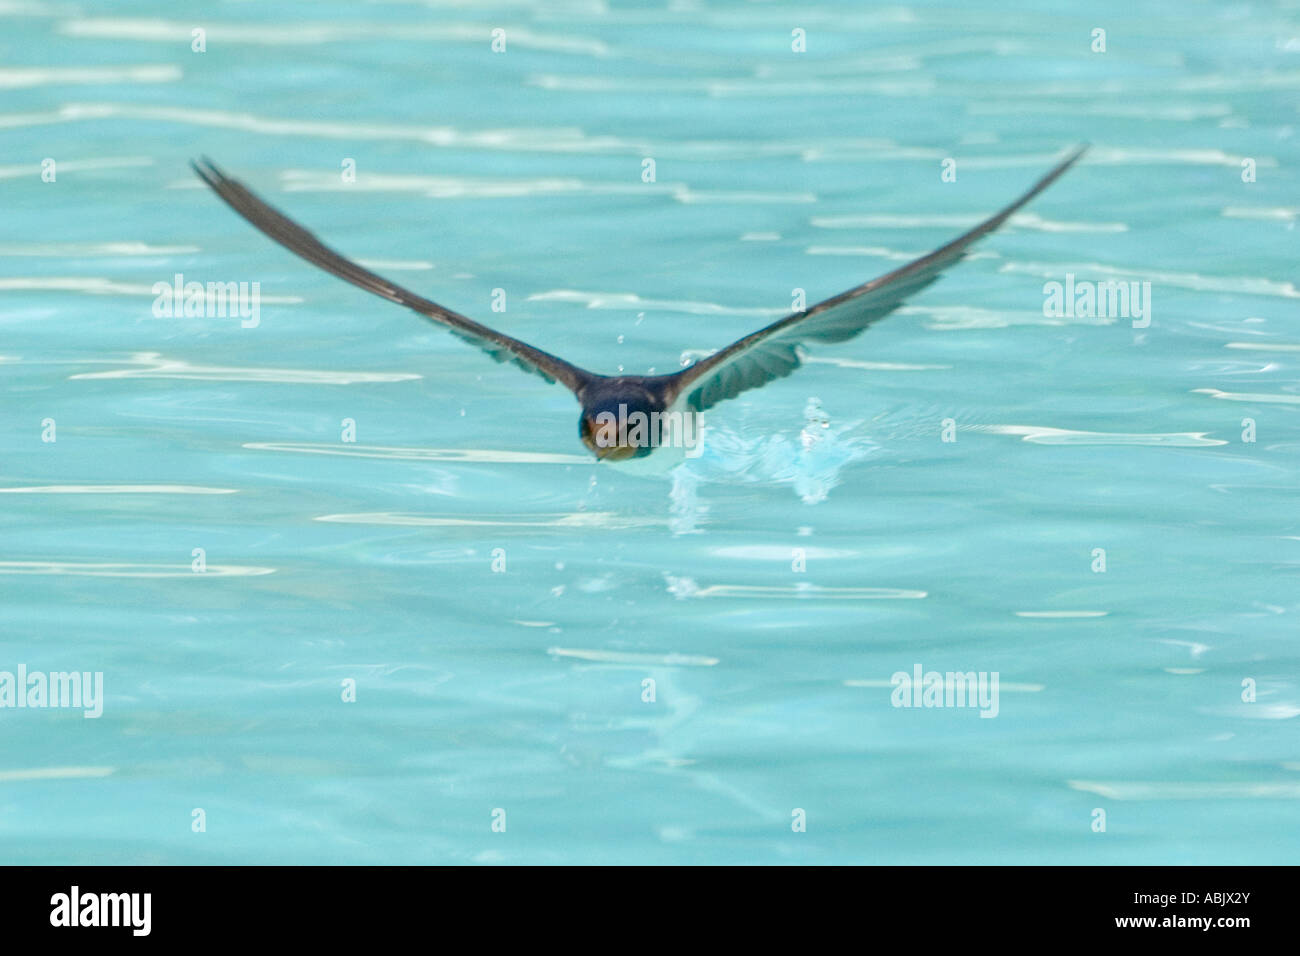 Swallow (Hirundo rustica) Drinking On The Wing From A Swimming Pool Stock Photo